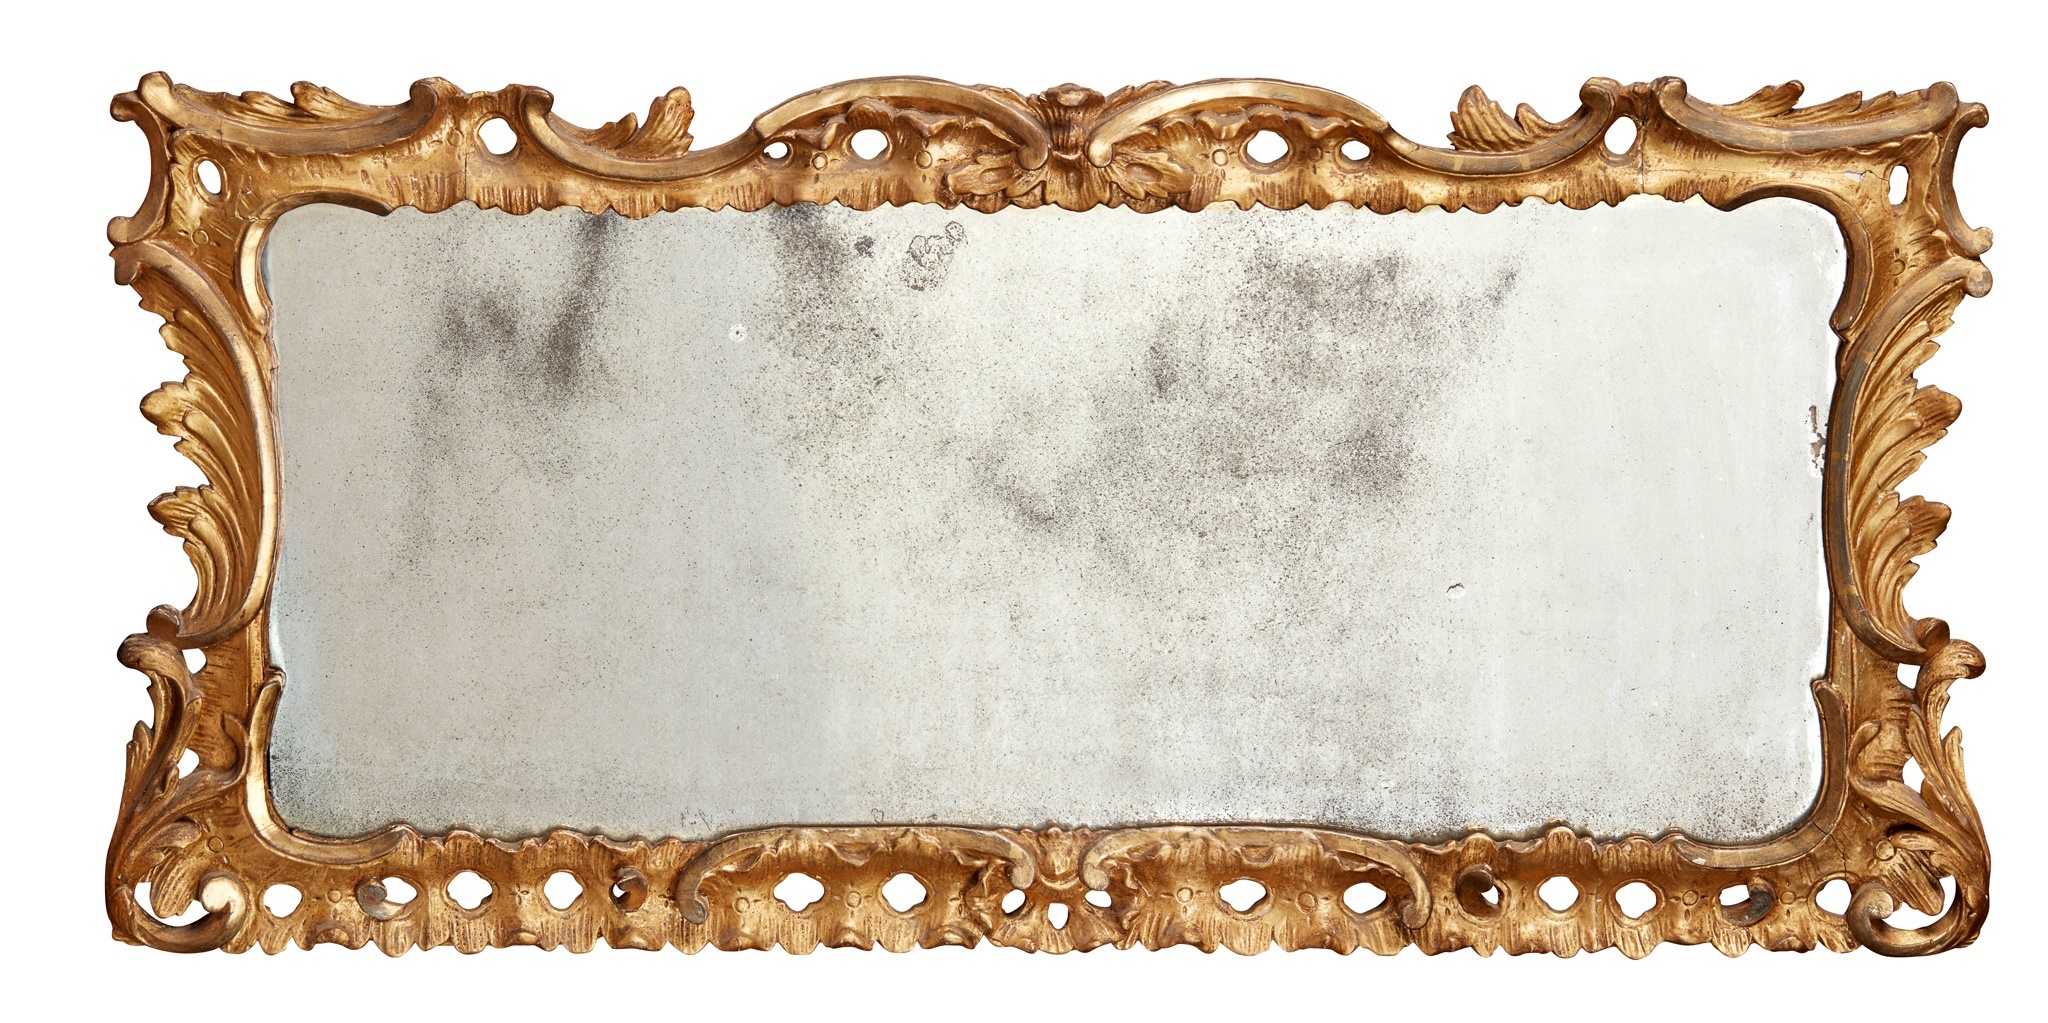 LOT 39 | EARLY GEORGIAN GILTWOOD AND GESSO MANTEL MIRROR | EARLY 18TH CENTURY | £800 - £1,200 + fees